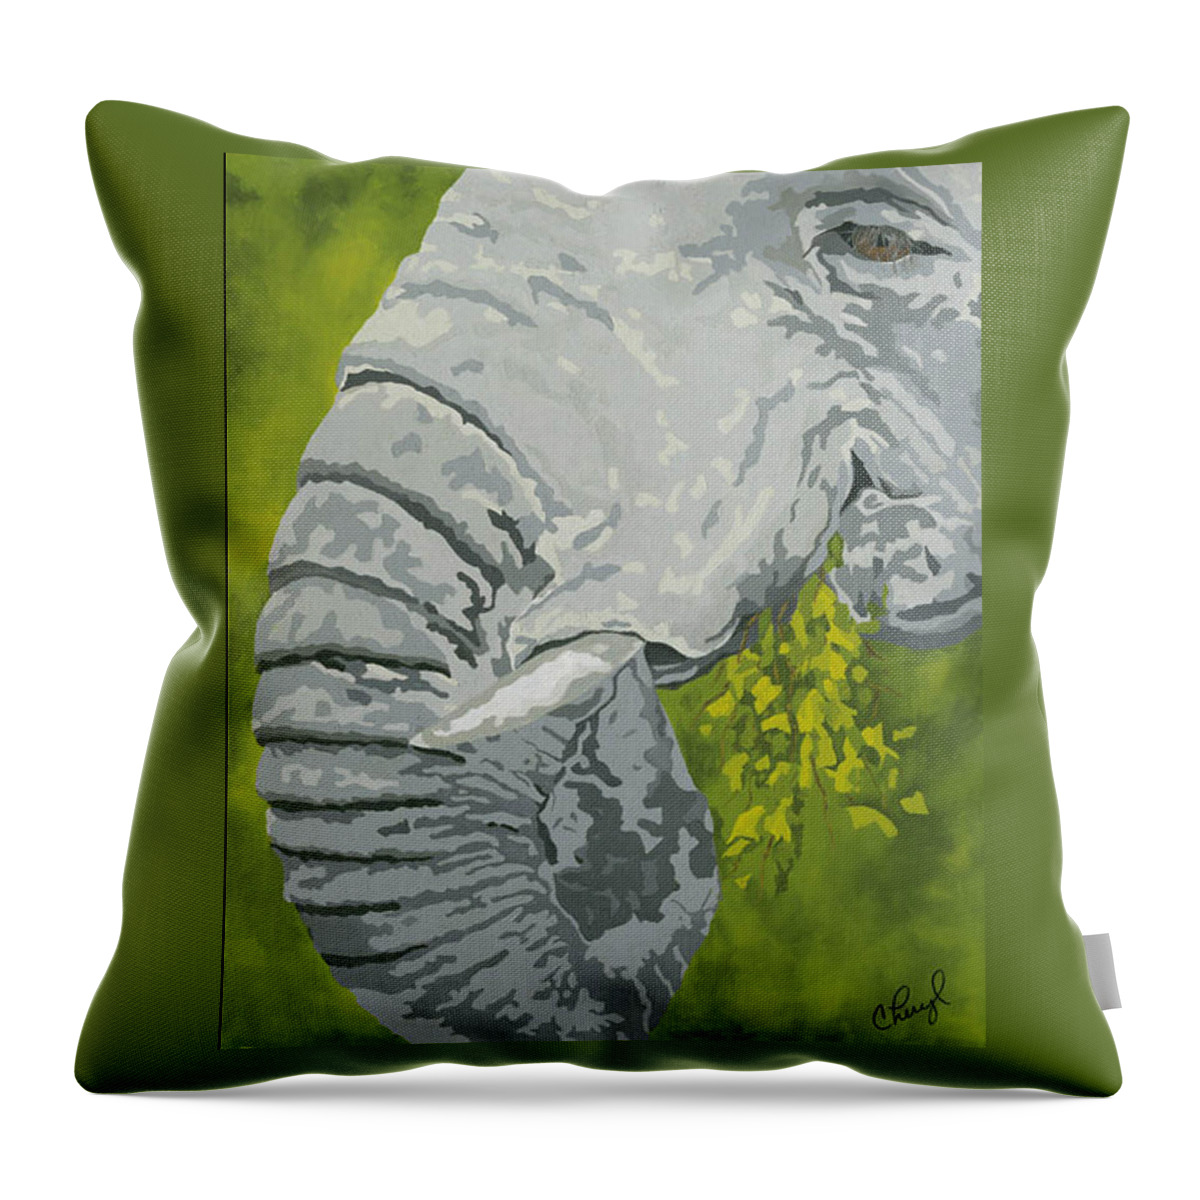 Elephant Throw Pillow featuring the painting Snack Time by Cheryl Bowman